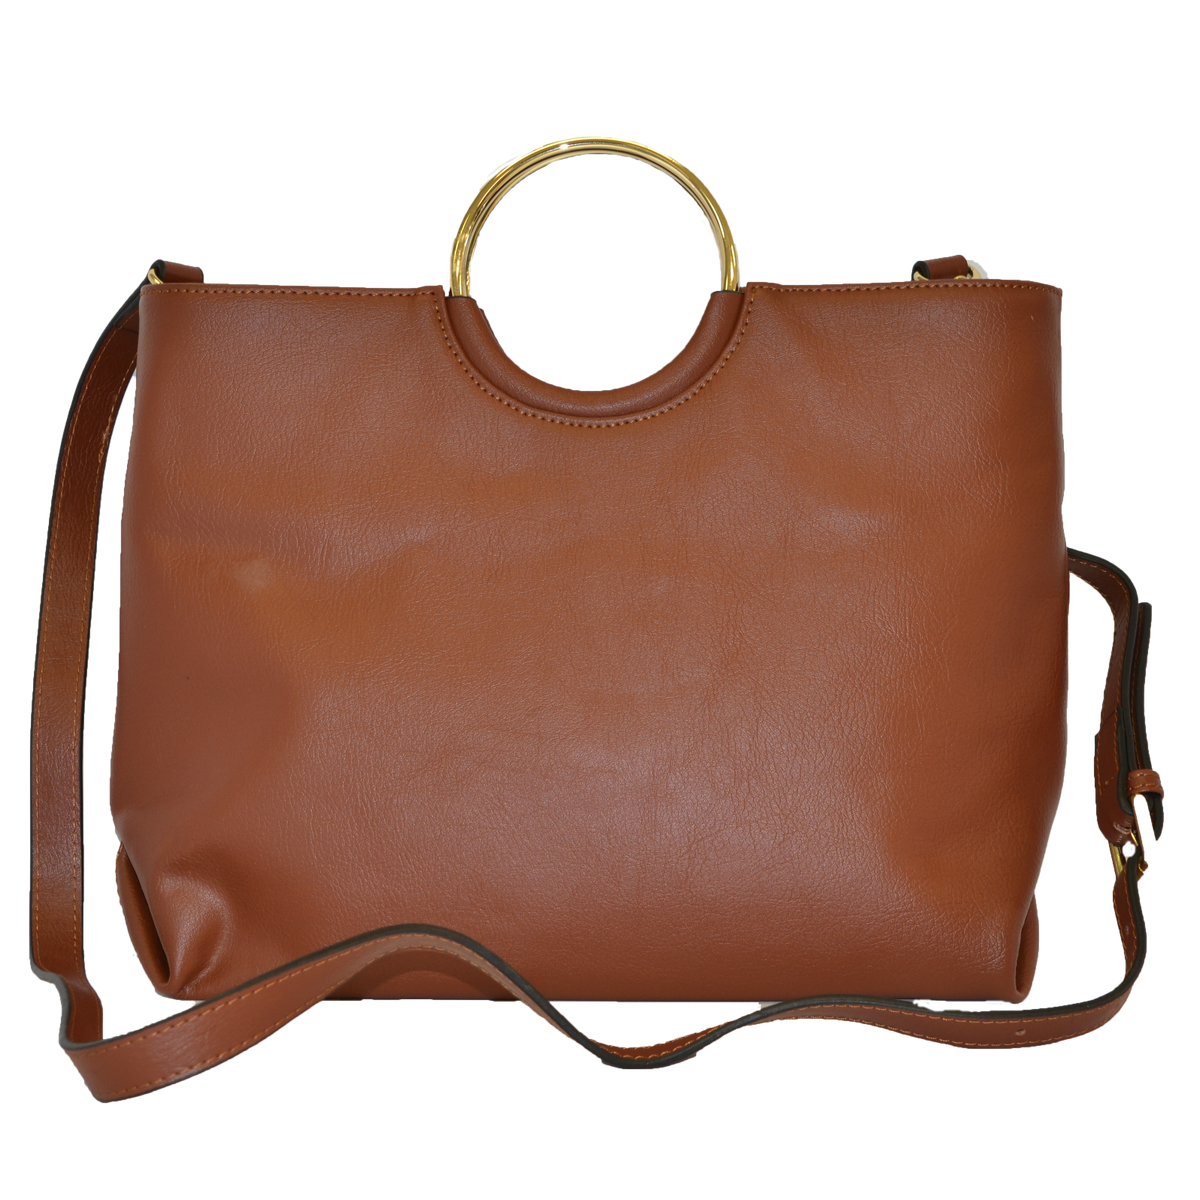 MILLFIELD Tan Structured Leather Ring Handle Bag Bag Addison Road